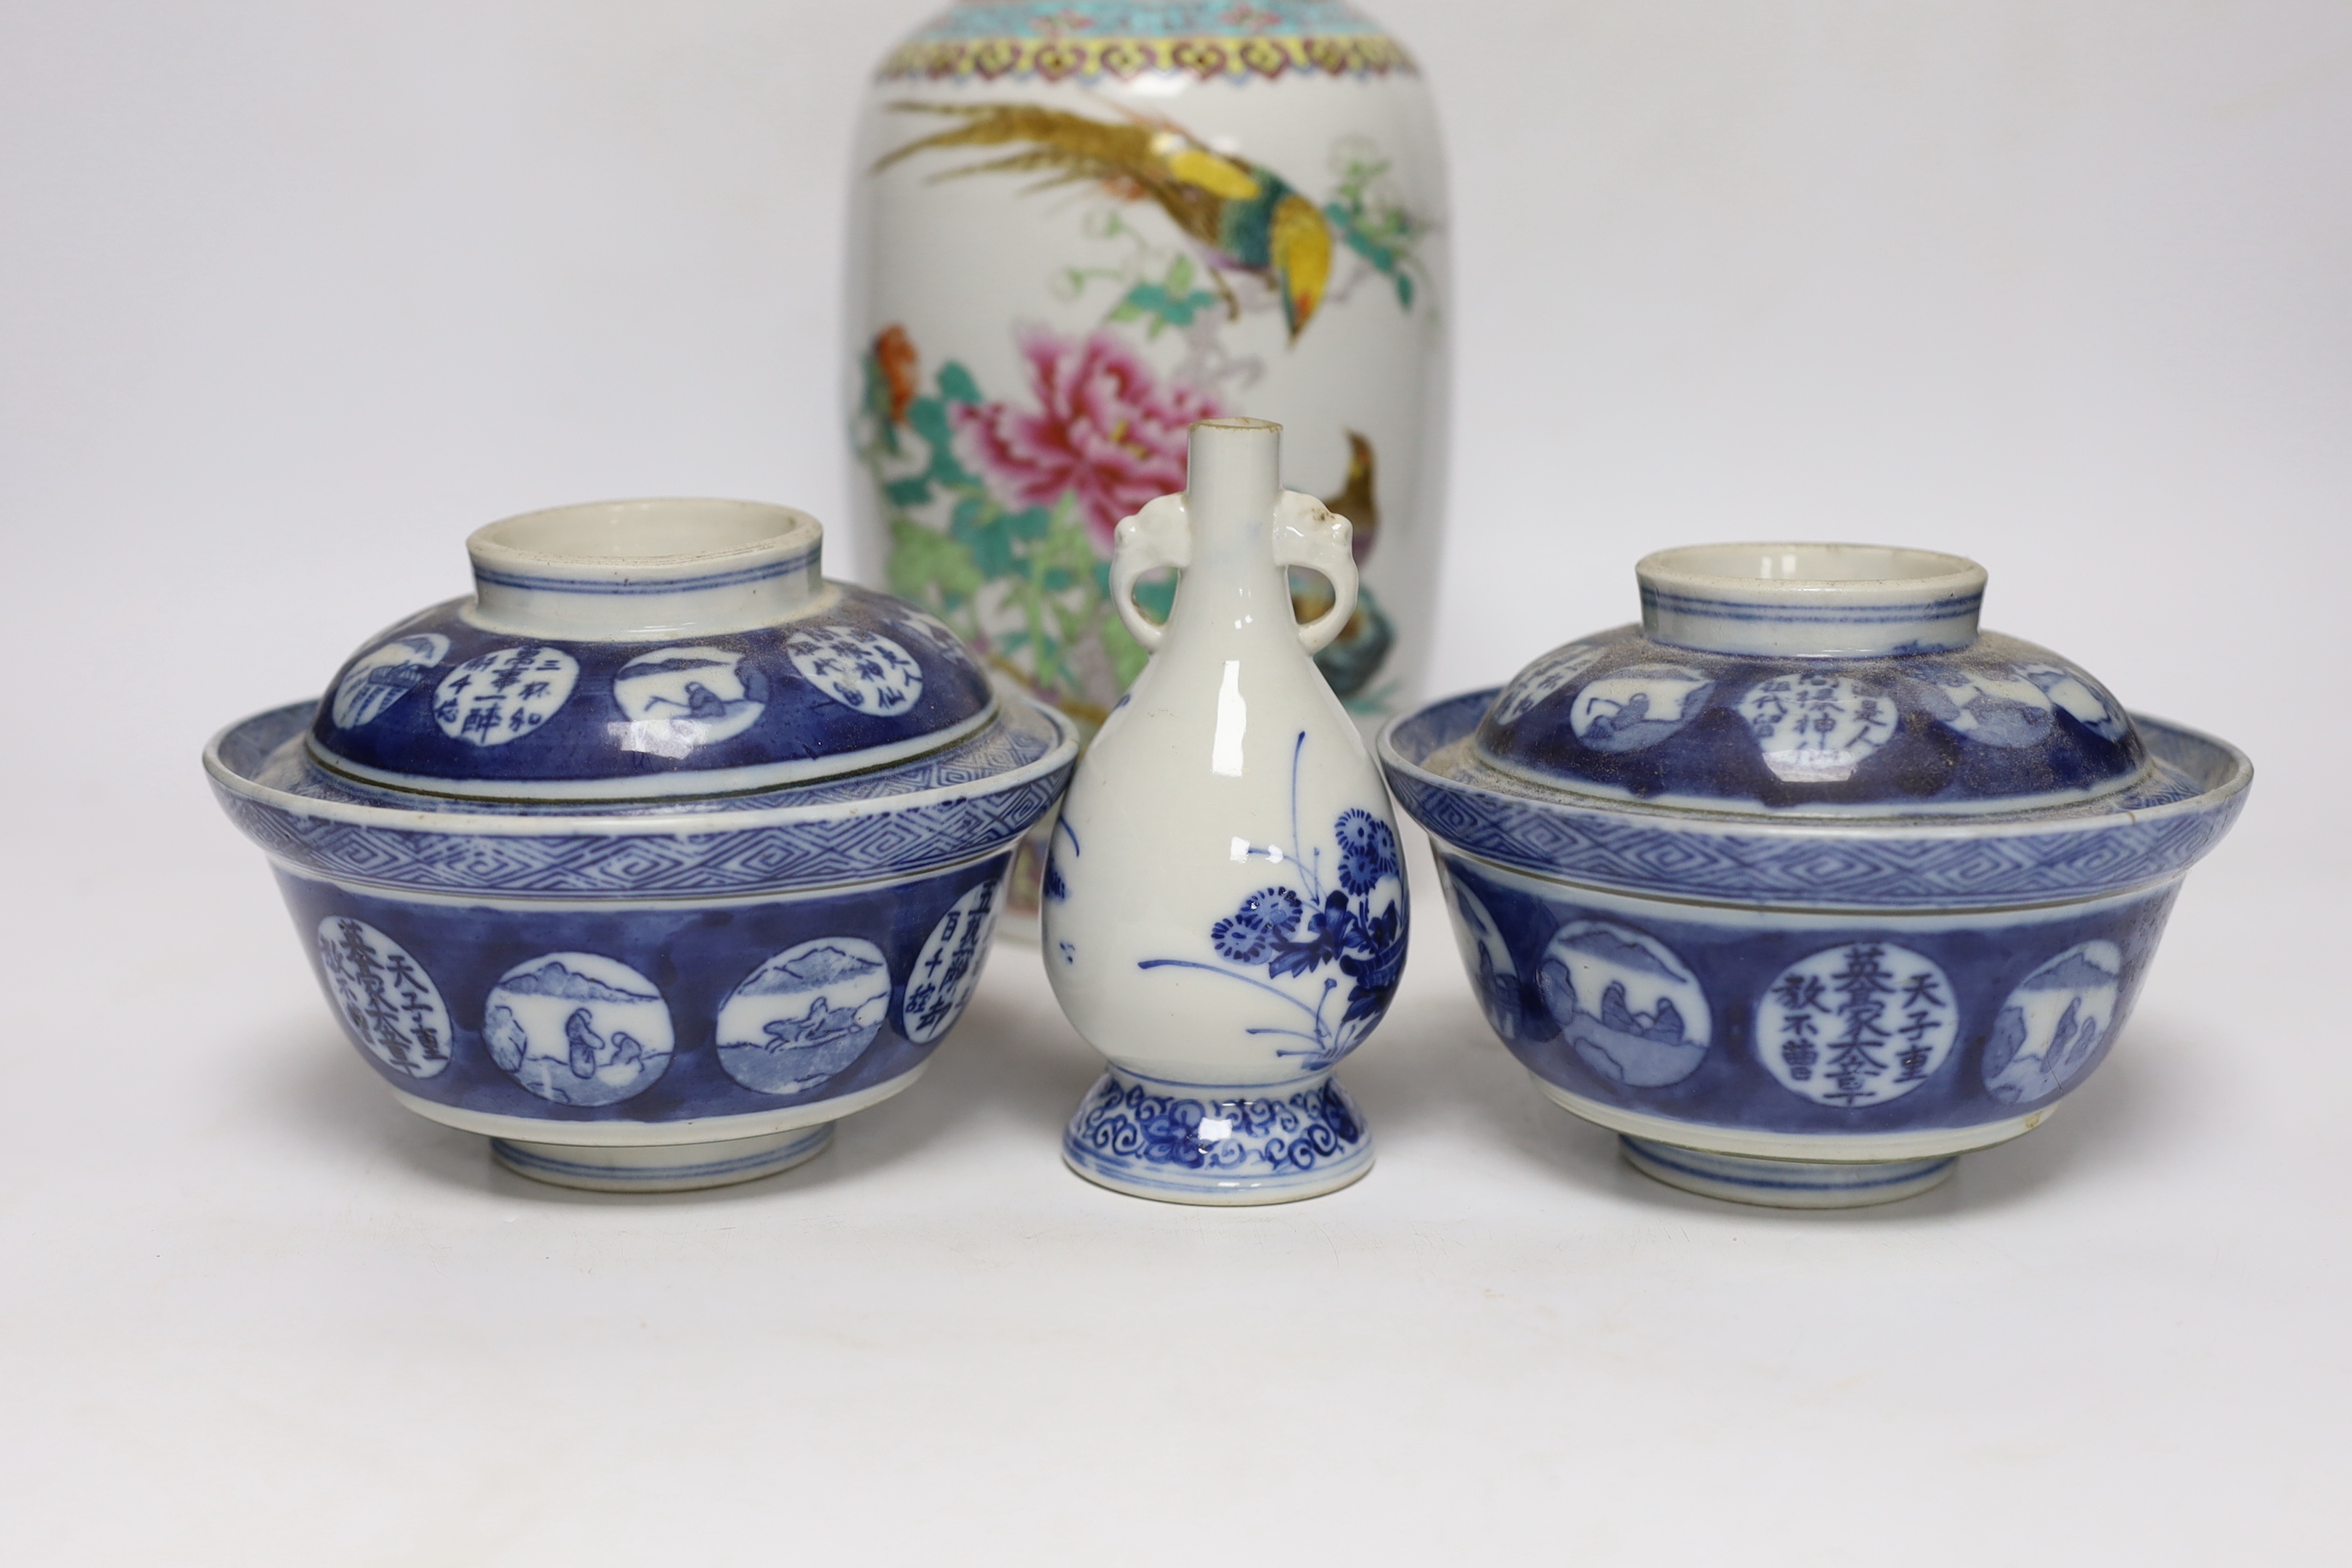 A Chinese famille rose vase, two Japanese blue and white rice bowls and covers and a Japanese blue and white vase (4) tallest 24.5cm